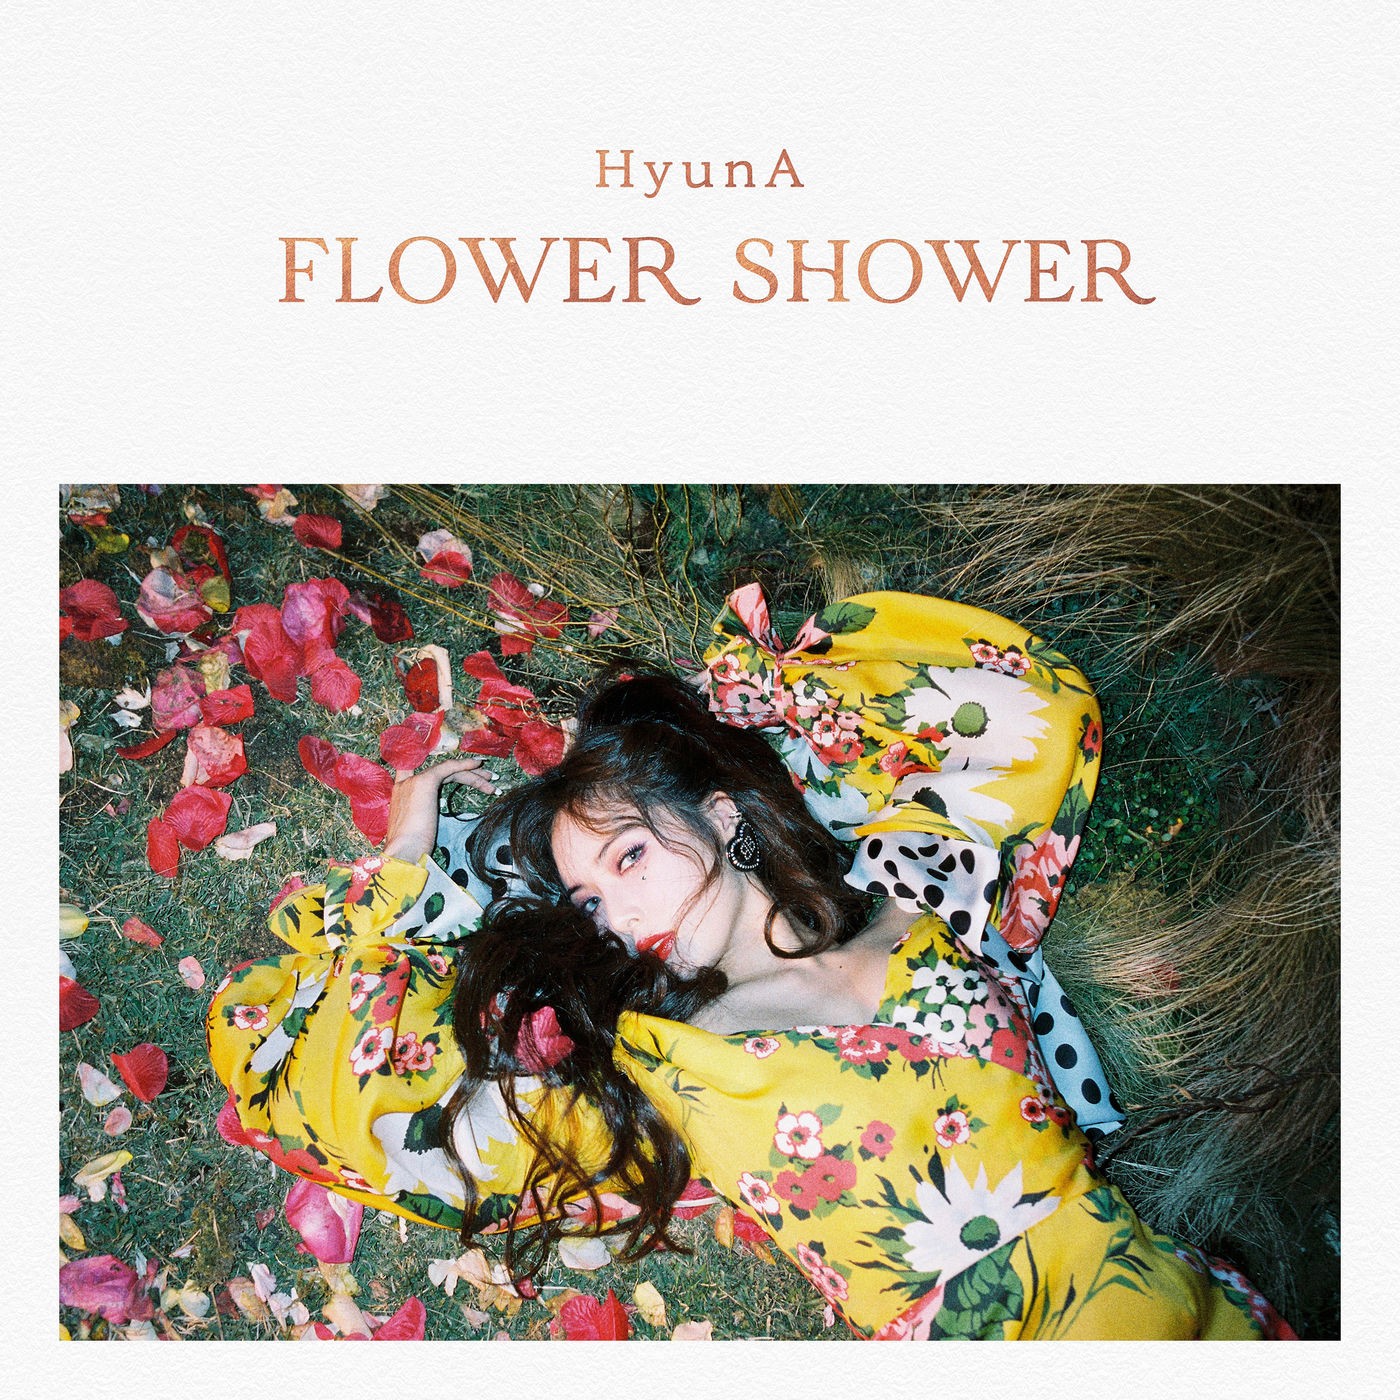 ASIAN MUSIC COLLECTION: [Single] Hyuna - FLOWER SHOWER [2019]